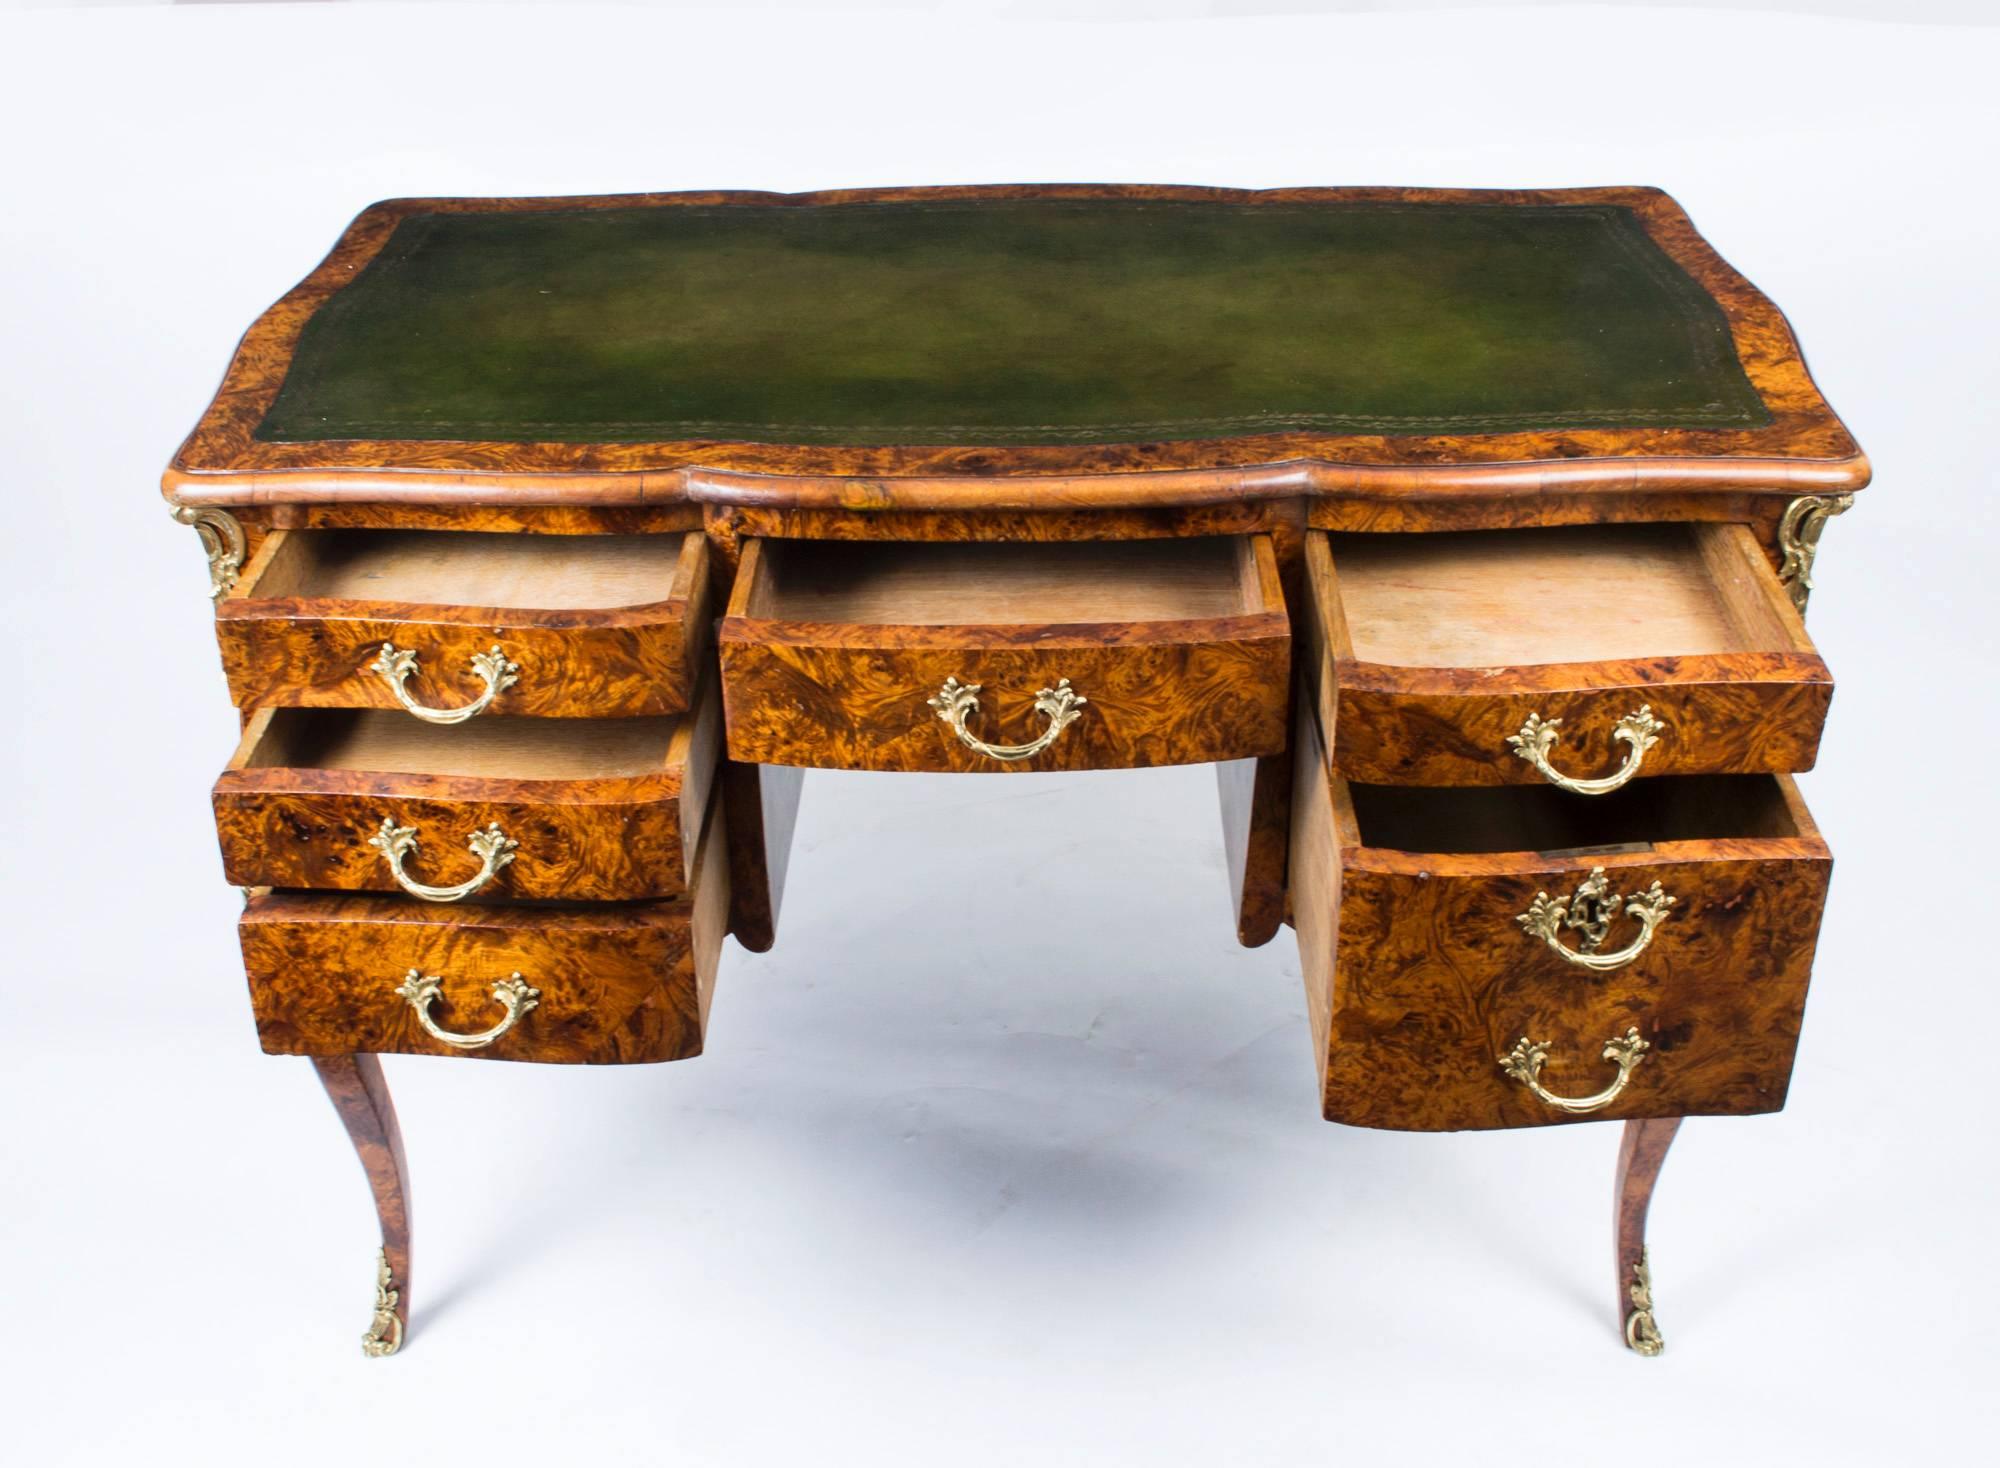 A gorgeous antique French ormolu-mounted Pollard oak desk, circa 1850 in date.

Featuring Pollard oak of wonderful color and of the very highest quality, with its striking sinuous serpentine sides this table is sure to get noticed wherever it is